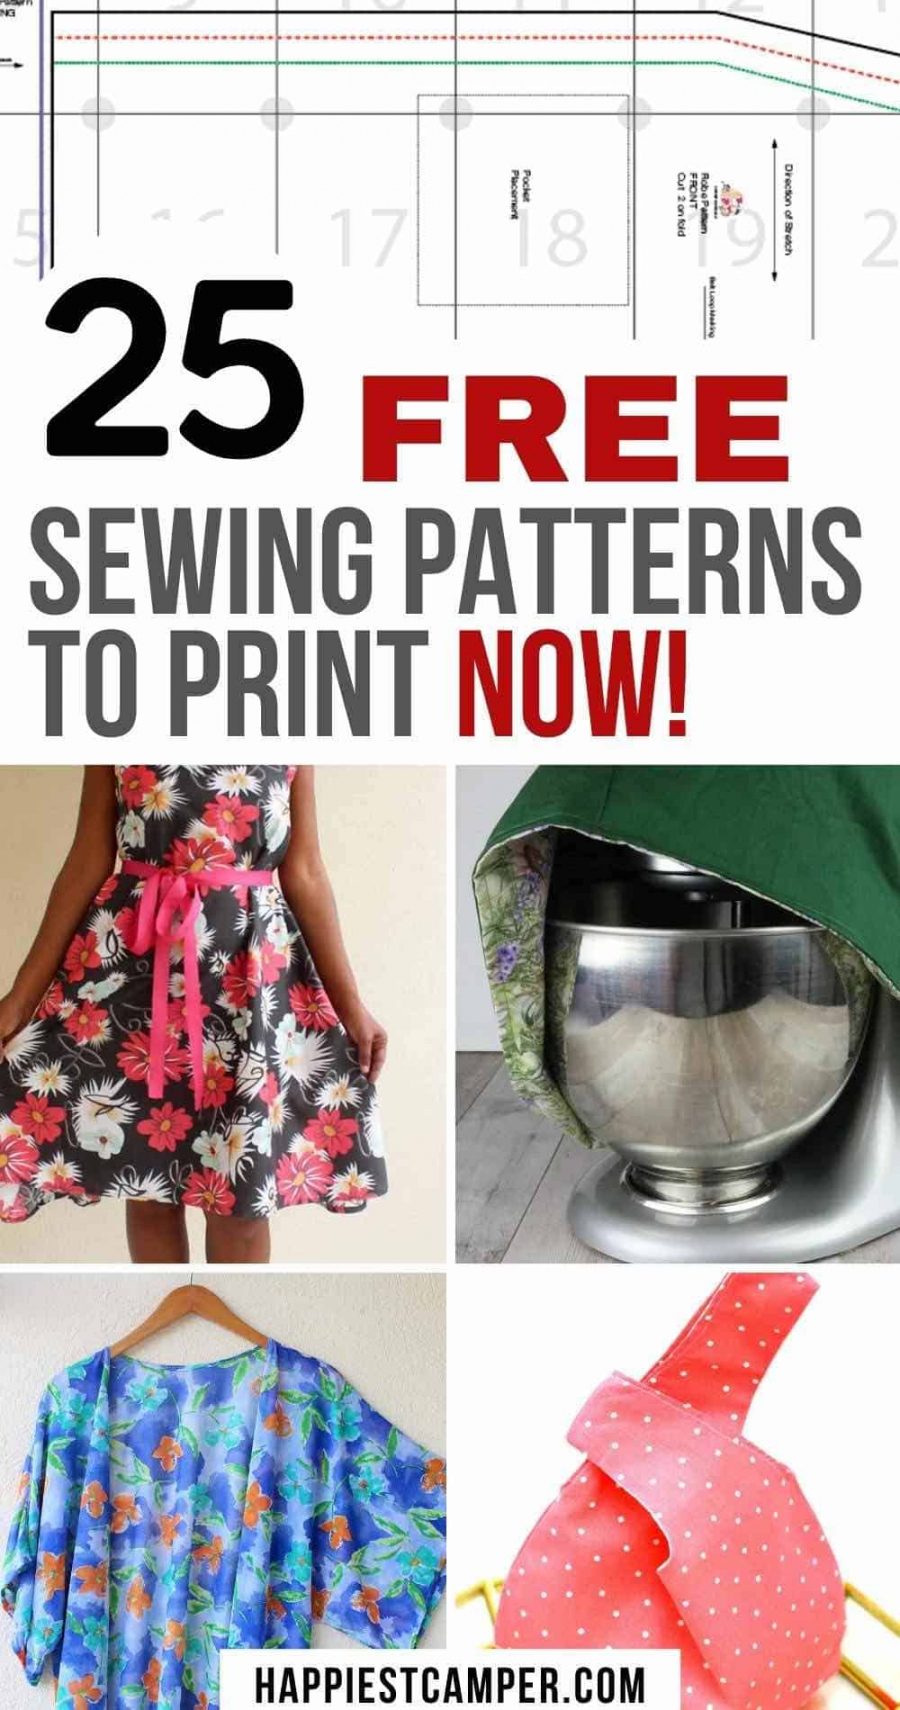 Free Printable Sewing Patterns - Printable - + Free Sewing Patterns You Can Download Now!